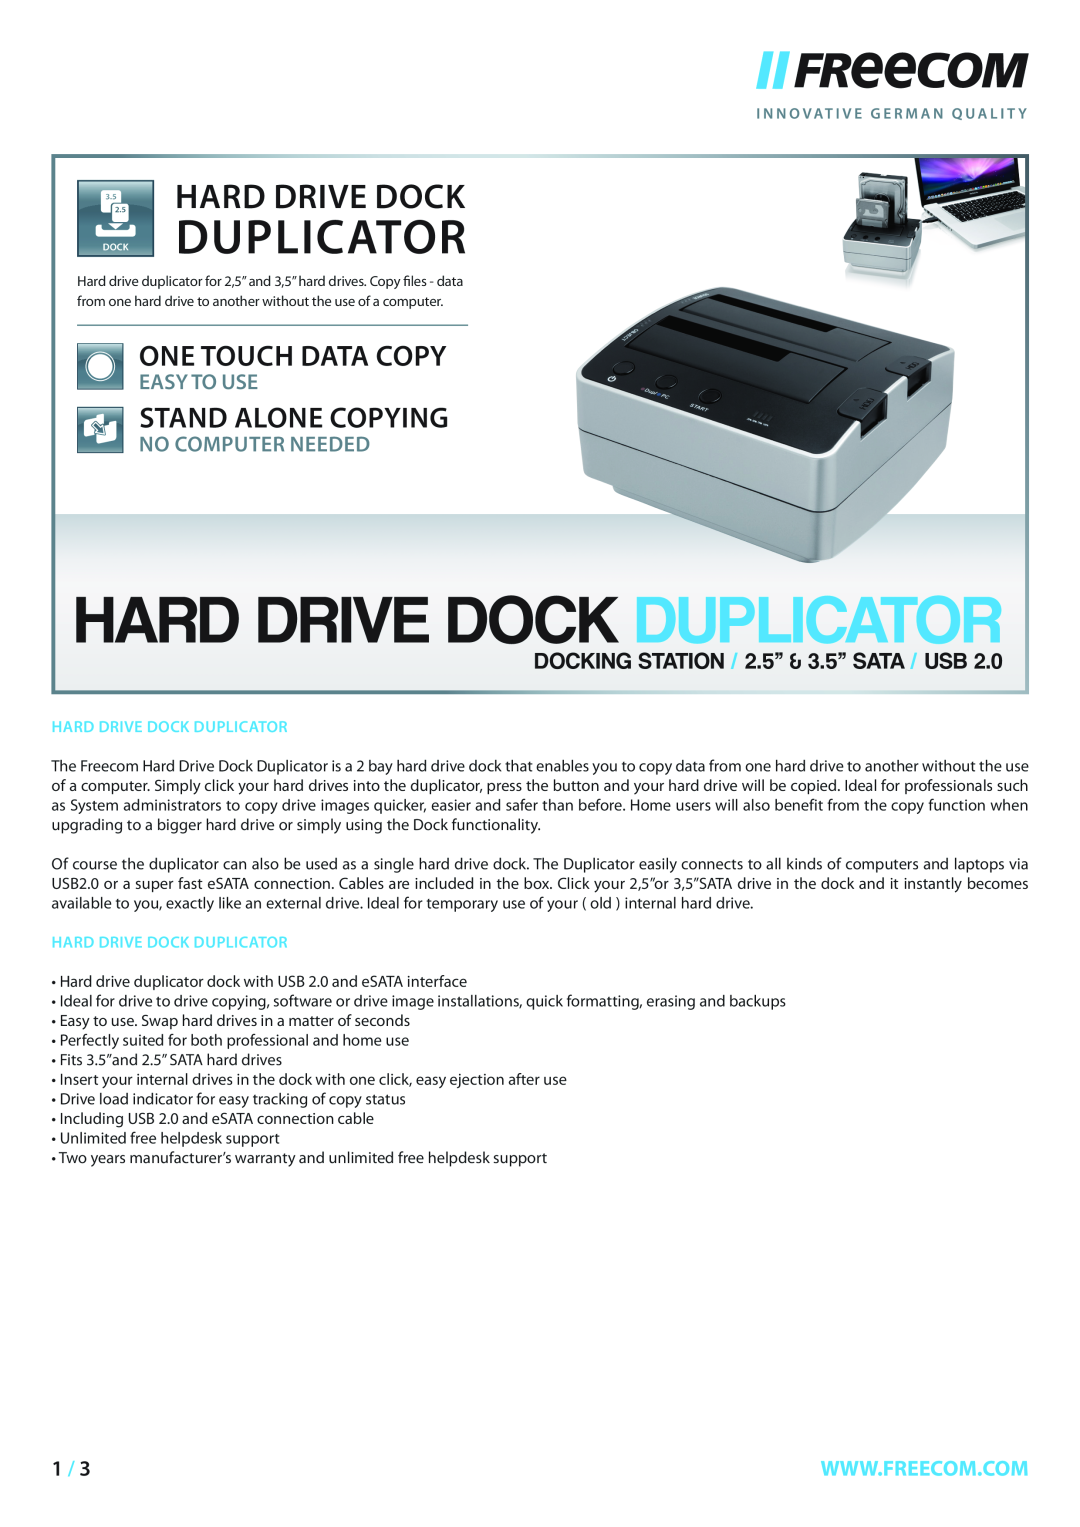 Freecom Technologies Hard Drive Dock Duplicator warranty One Touch Data Copy, Stand Alone Copying, Easy To Use 